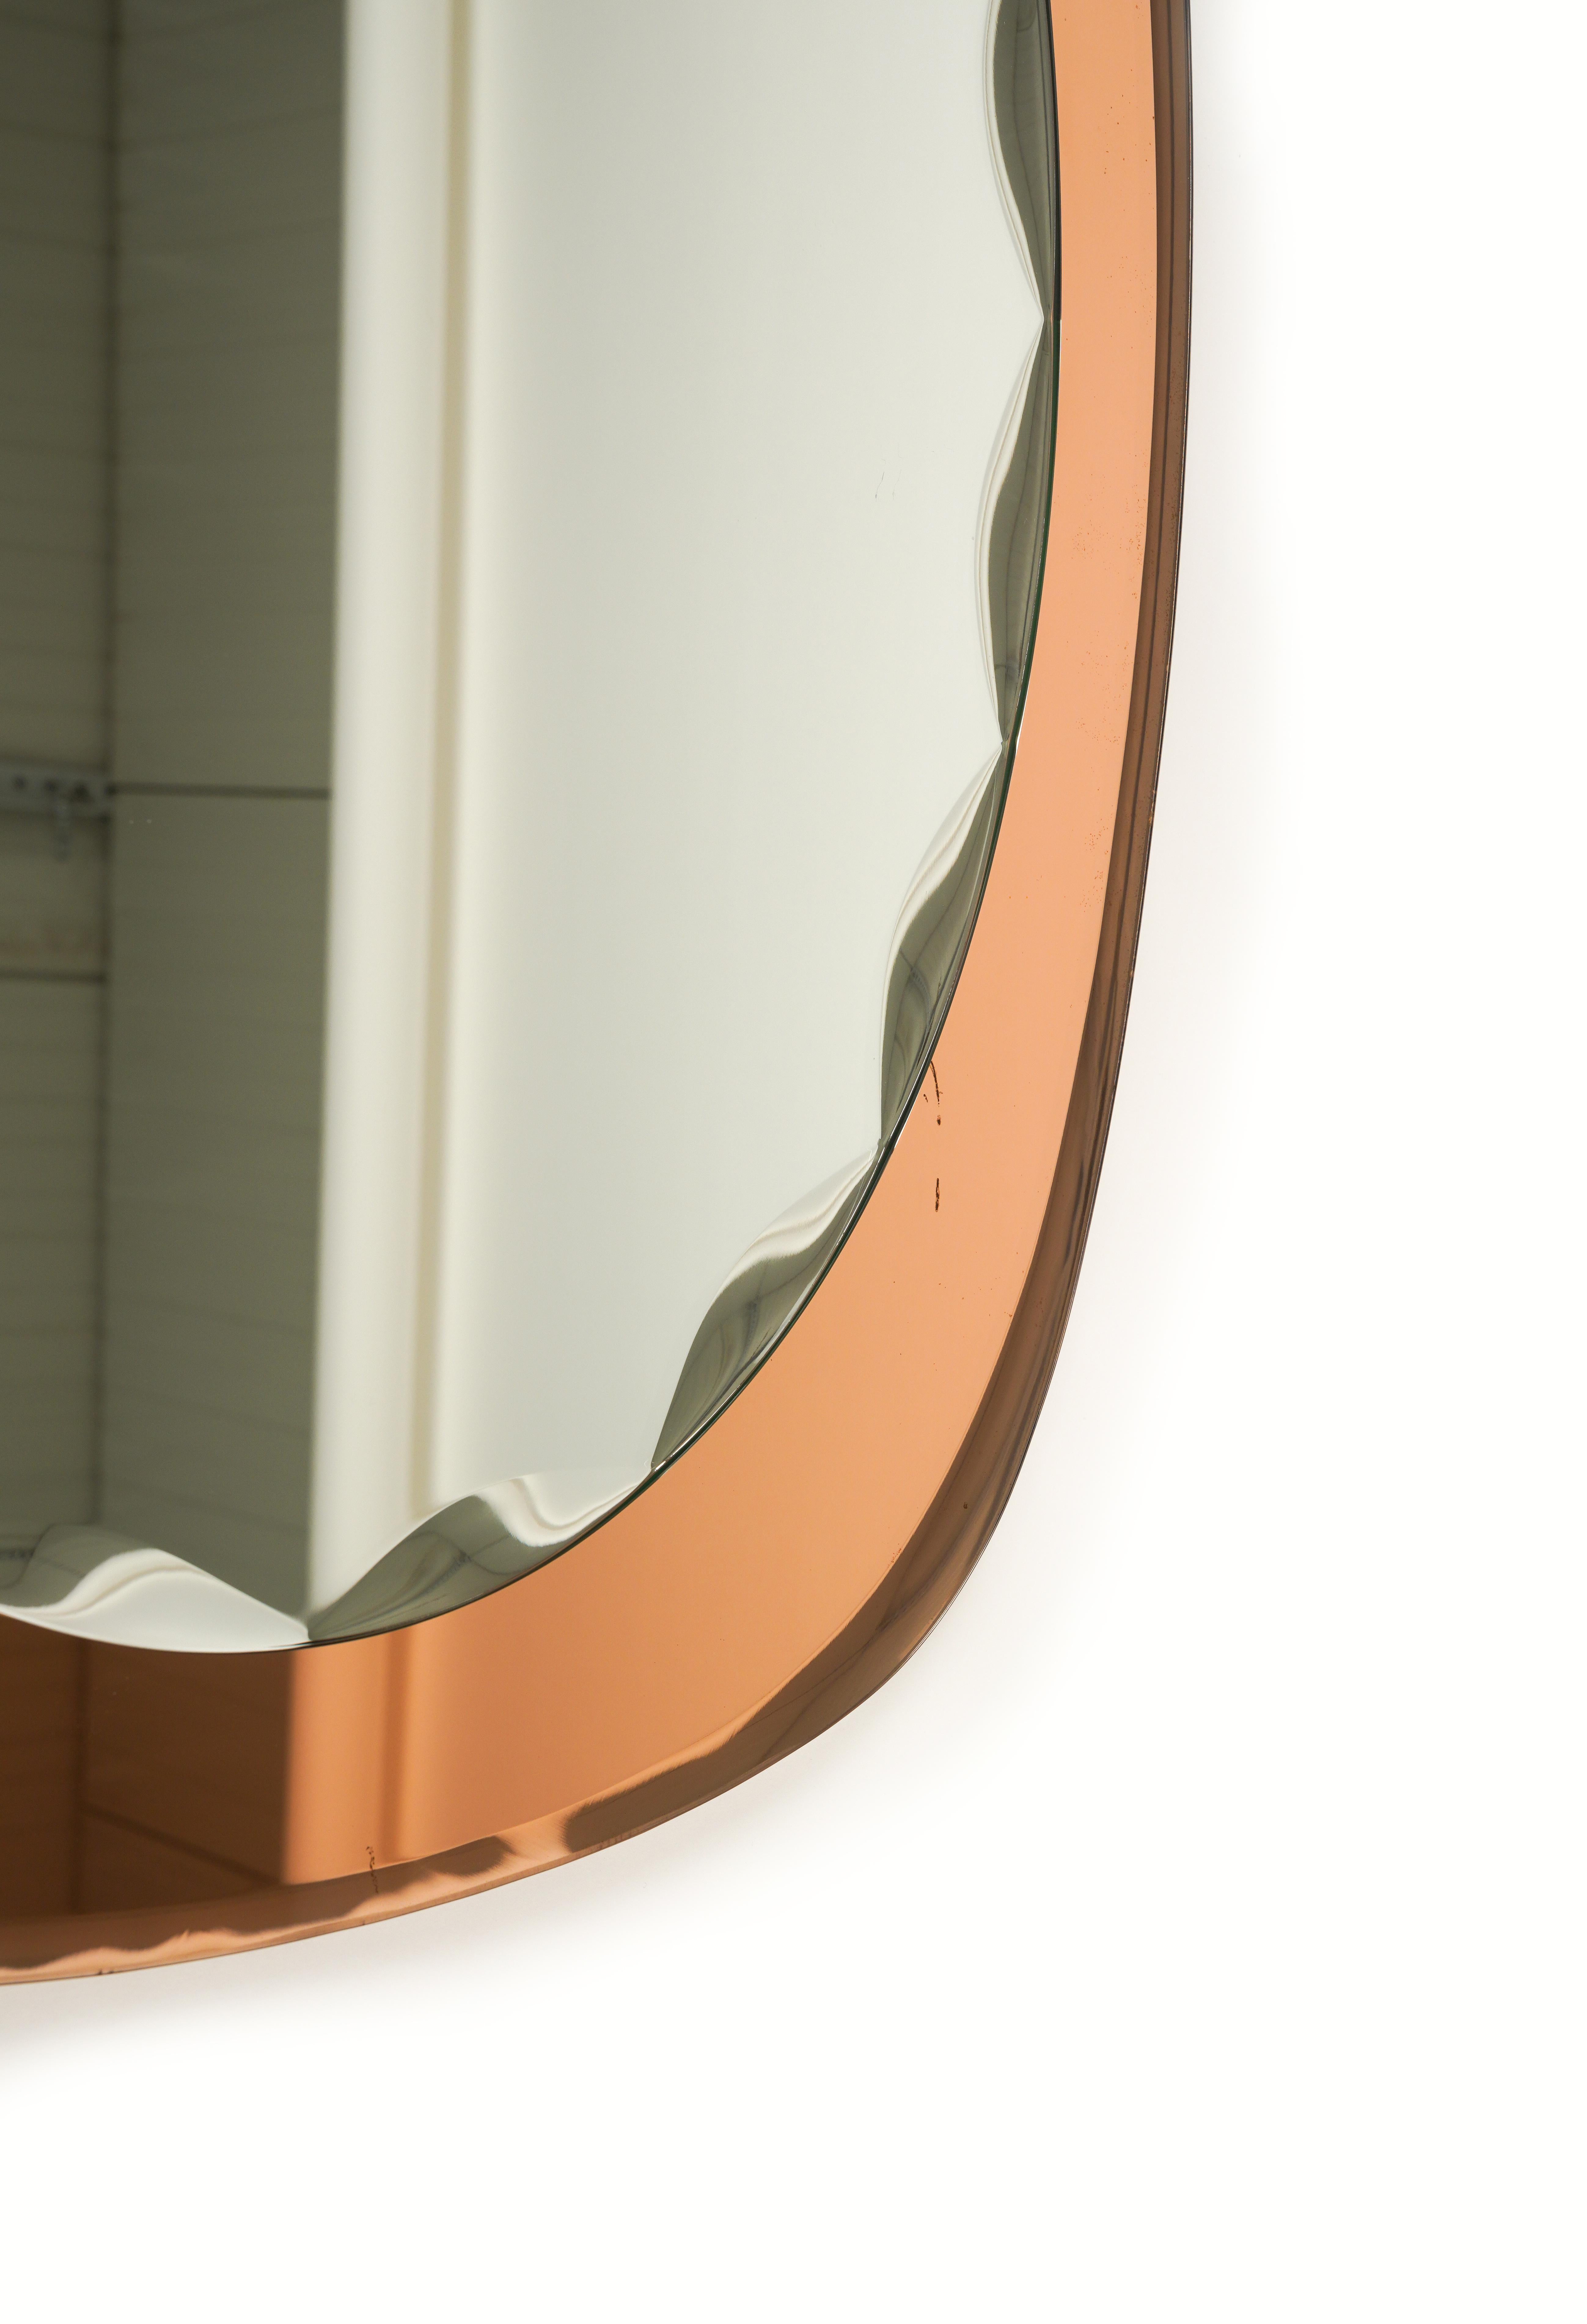 Midcentury Oval Wall Mirror rose gold Glass Frame by Cristal Arte, Italy 1960s For Sale 2